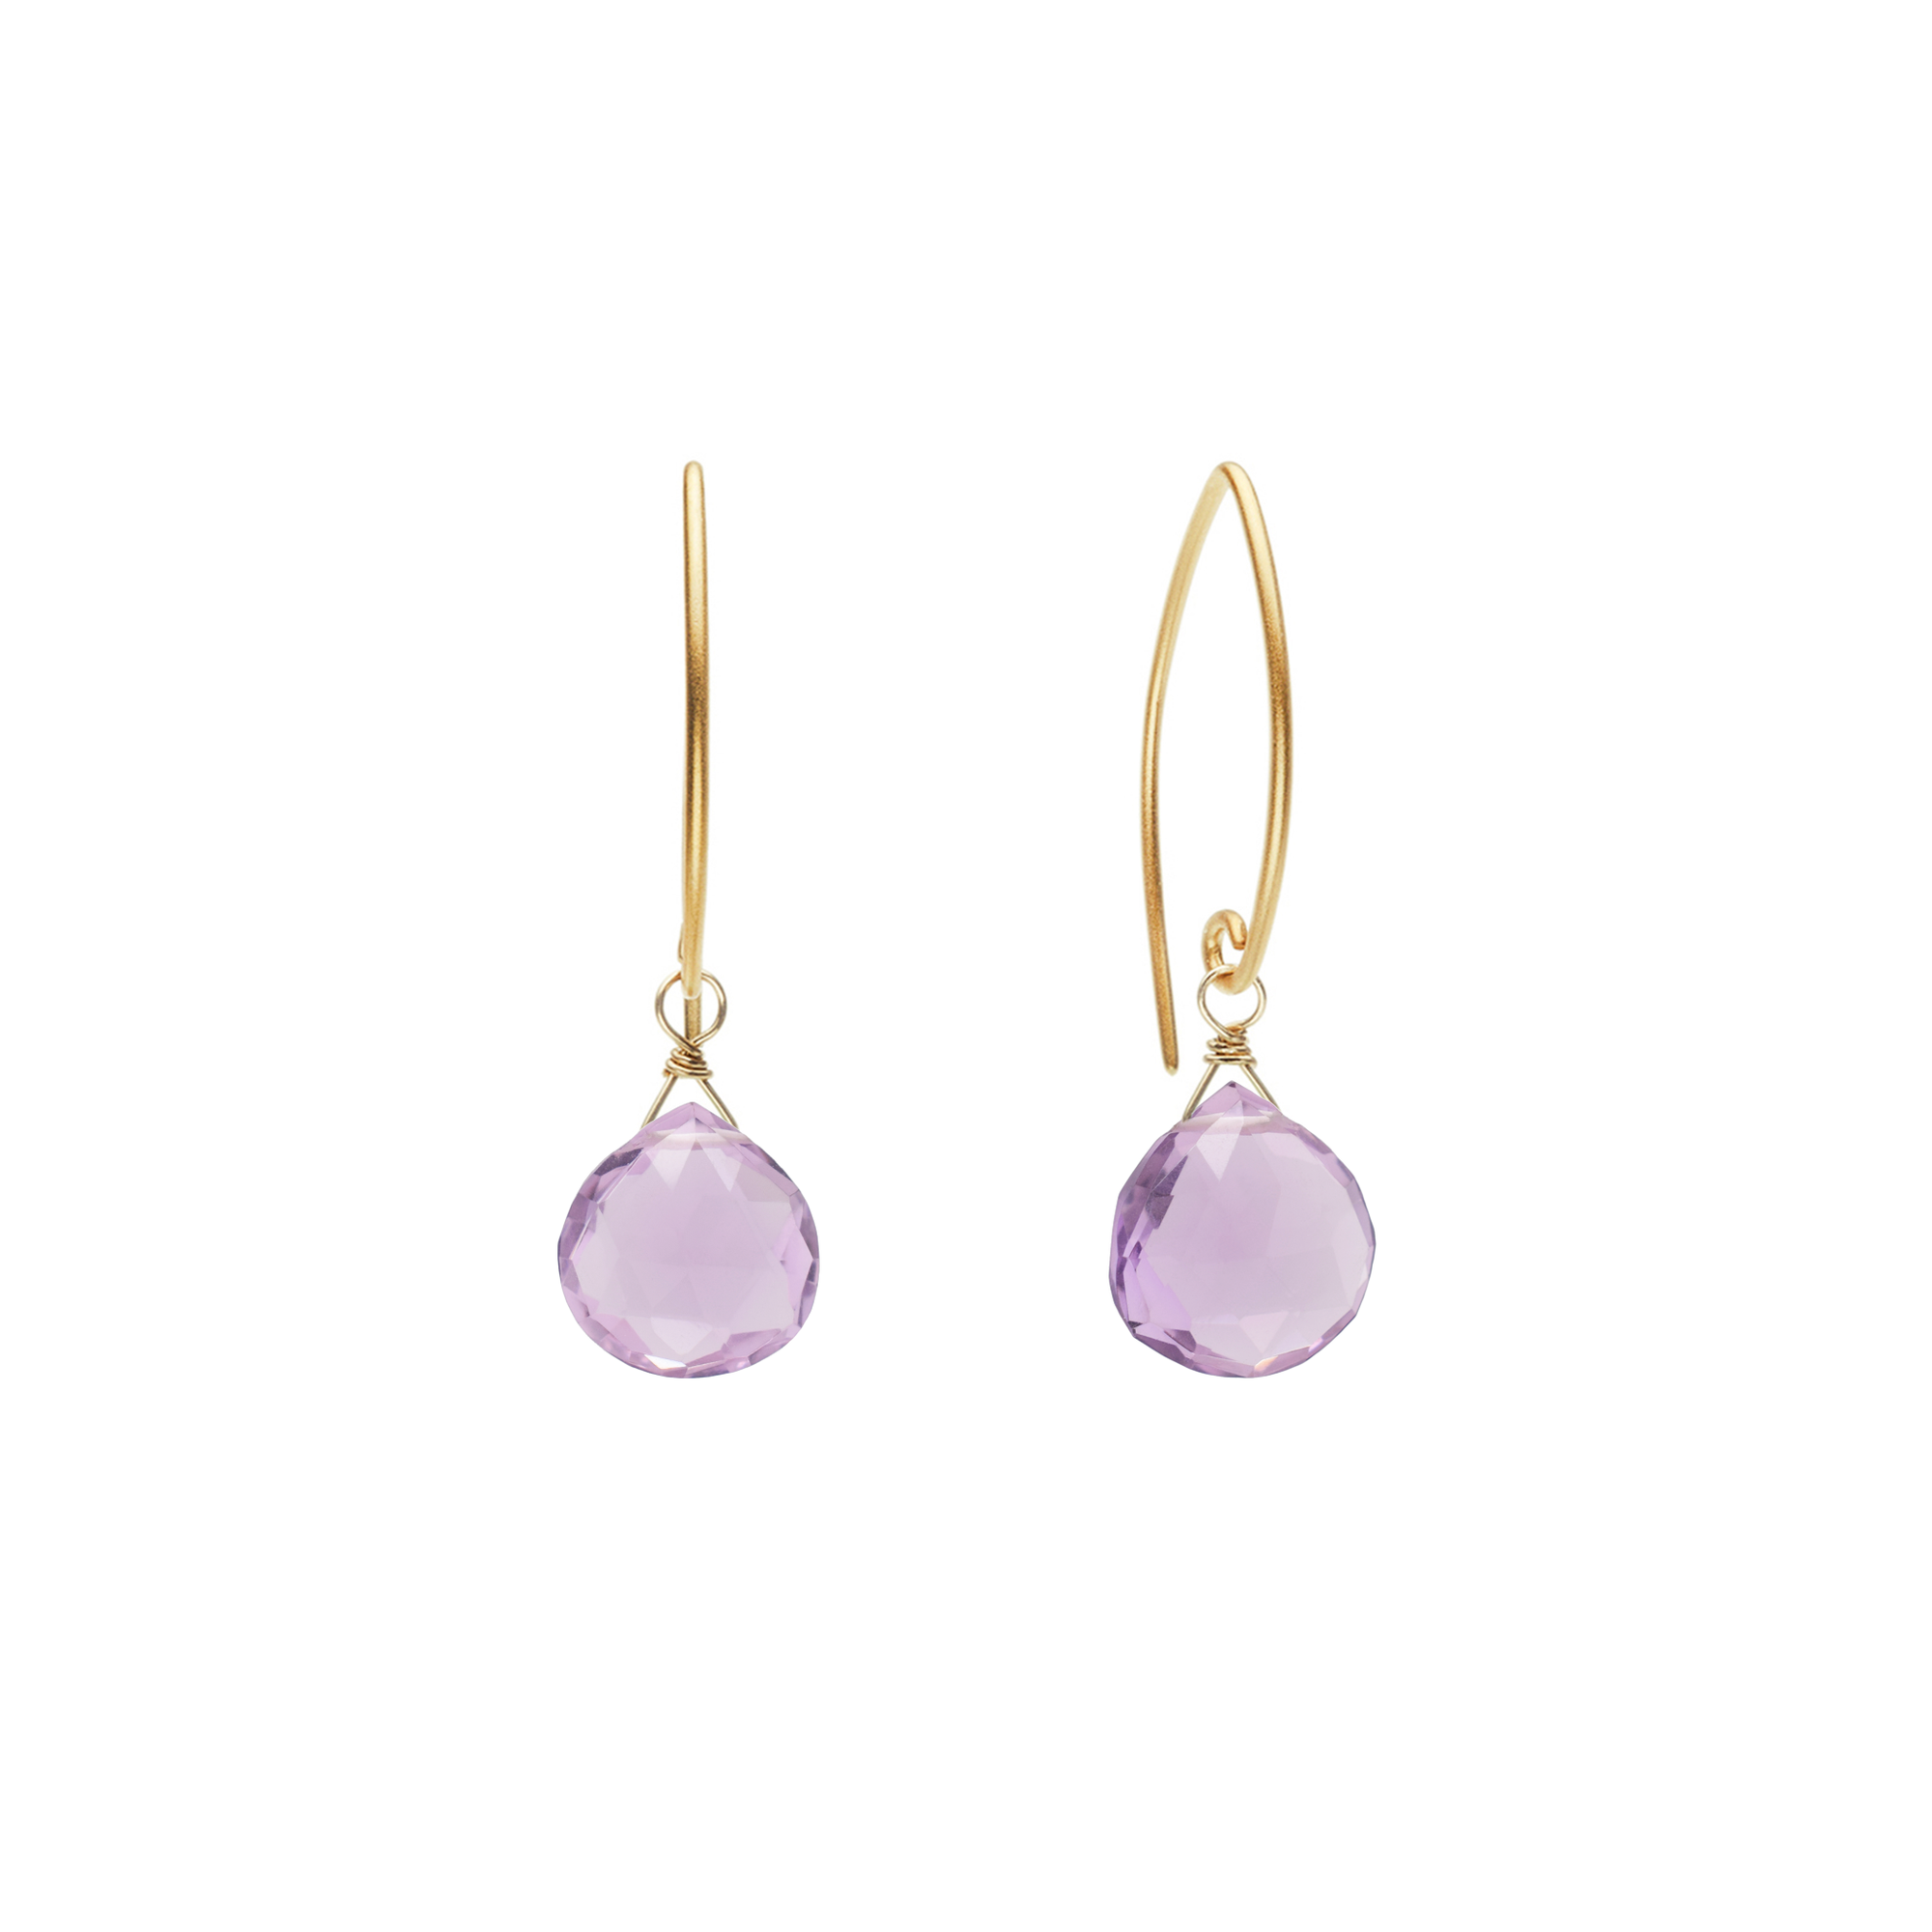 Image of gold dangle earrings with pink amethyst gemstone on white background